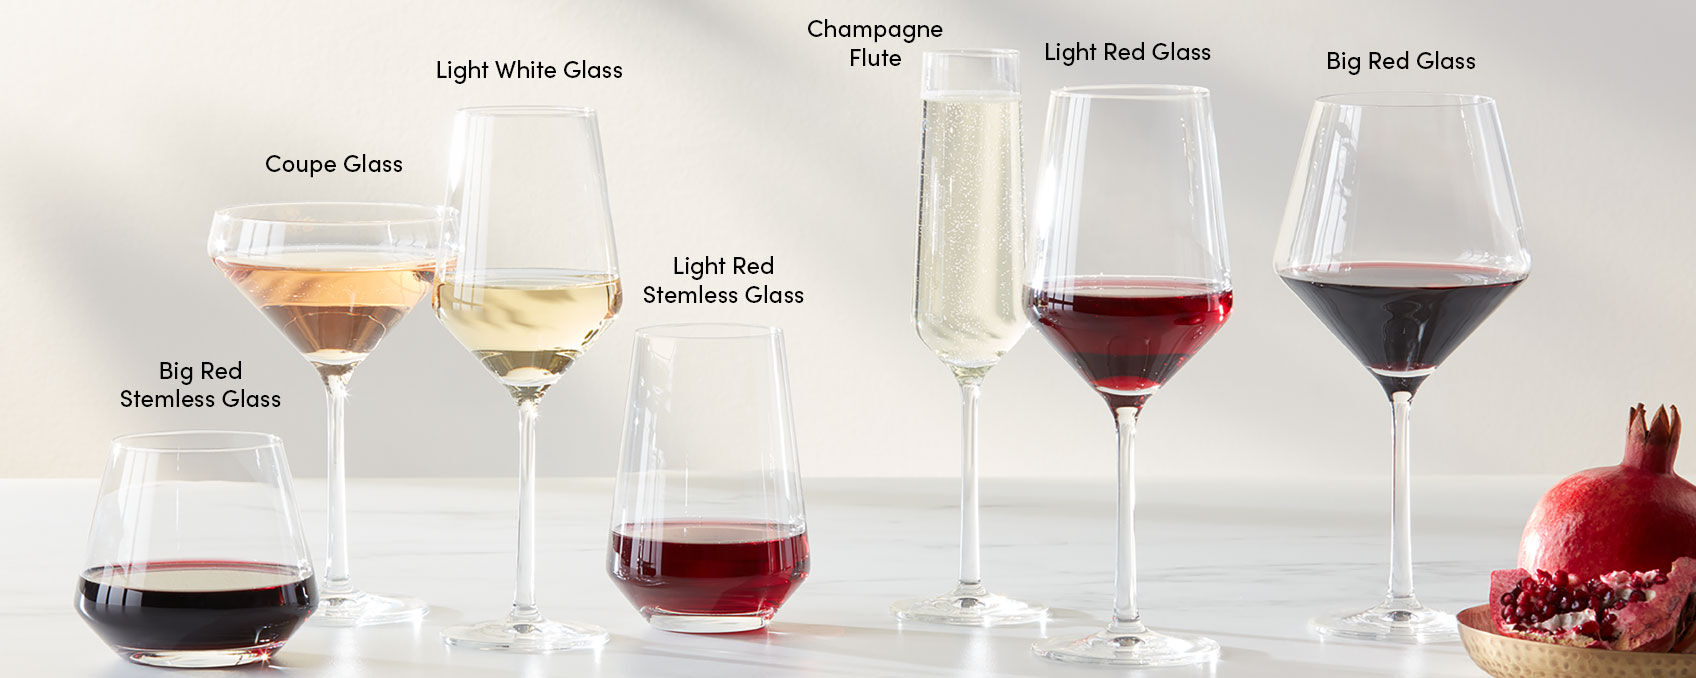 7 Types of Glasses Ideal for Alcoholic Beverages - Ellementry